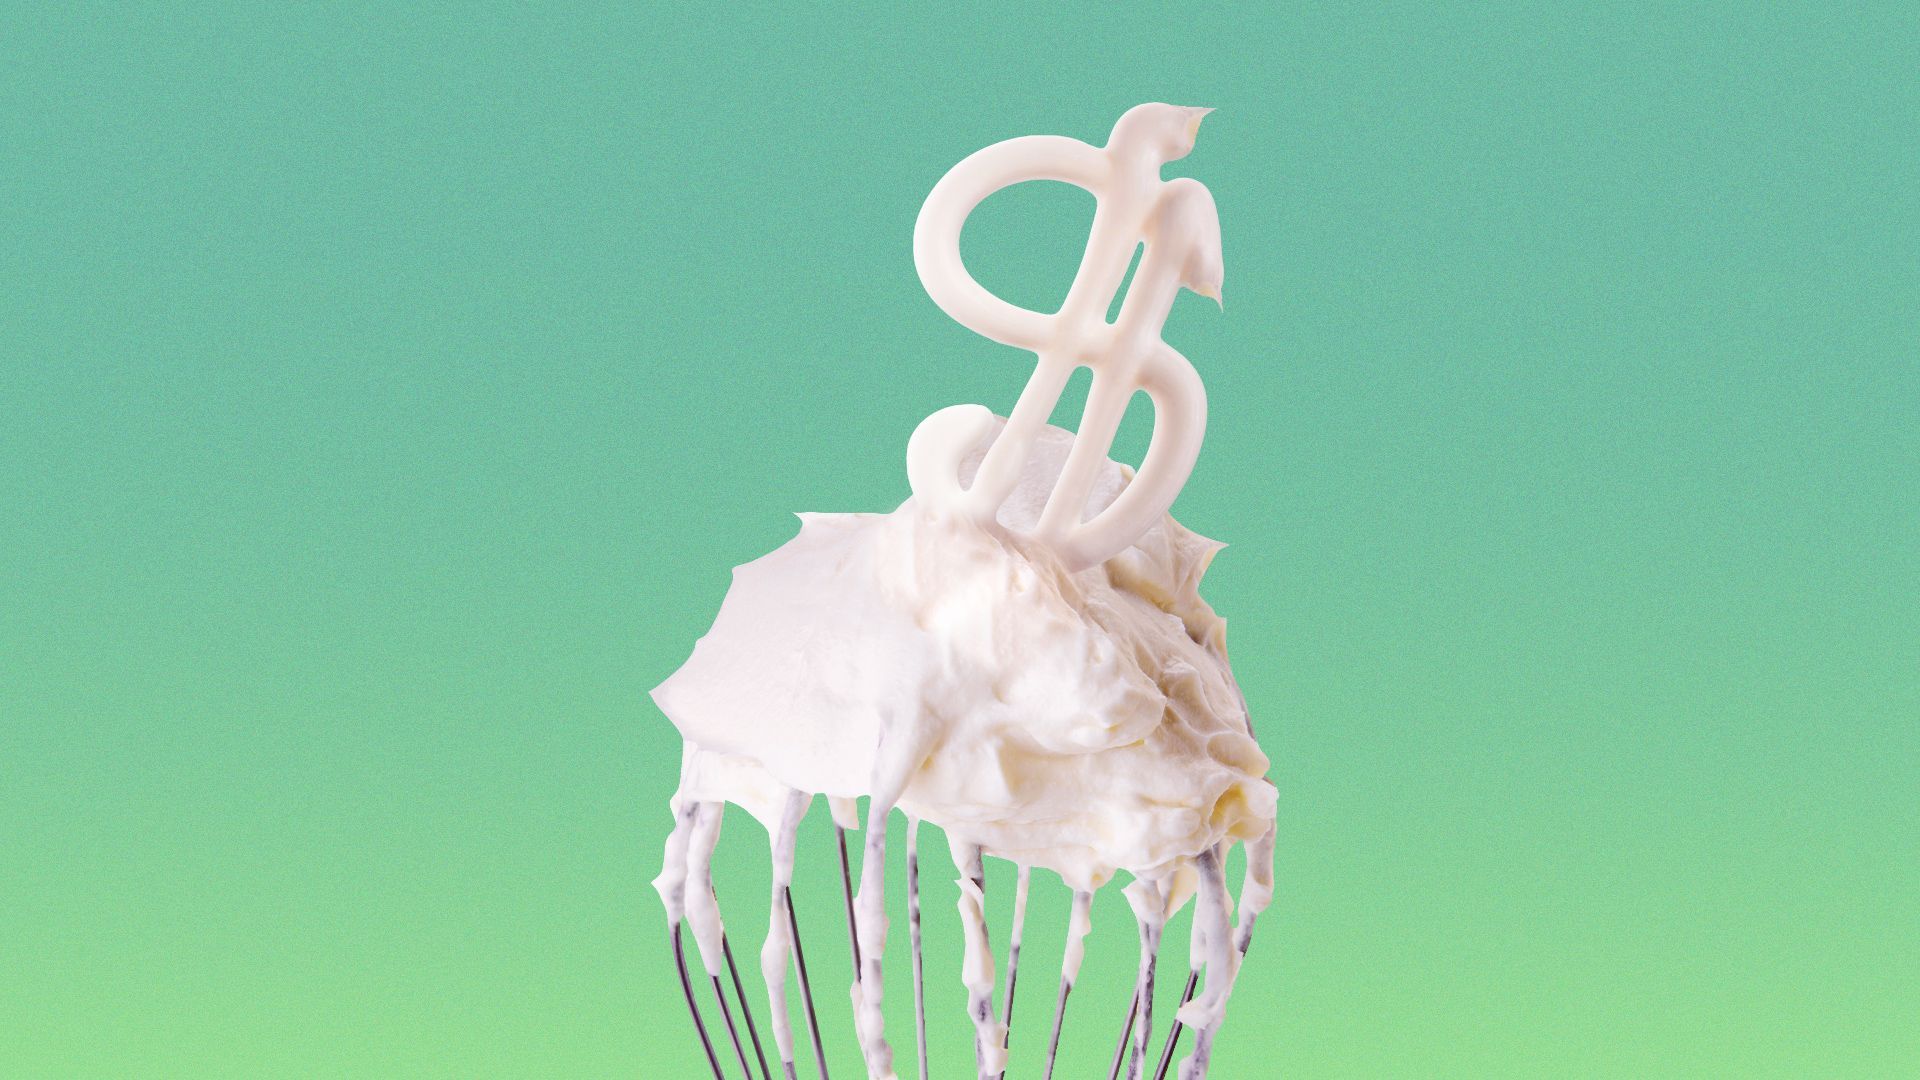 Illustration of a whisk with a dollar sign-shaped dollop of whipped cream.